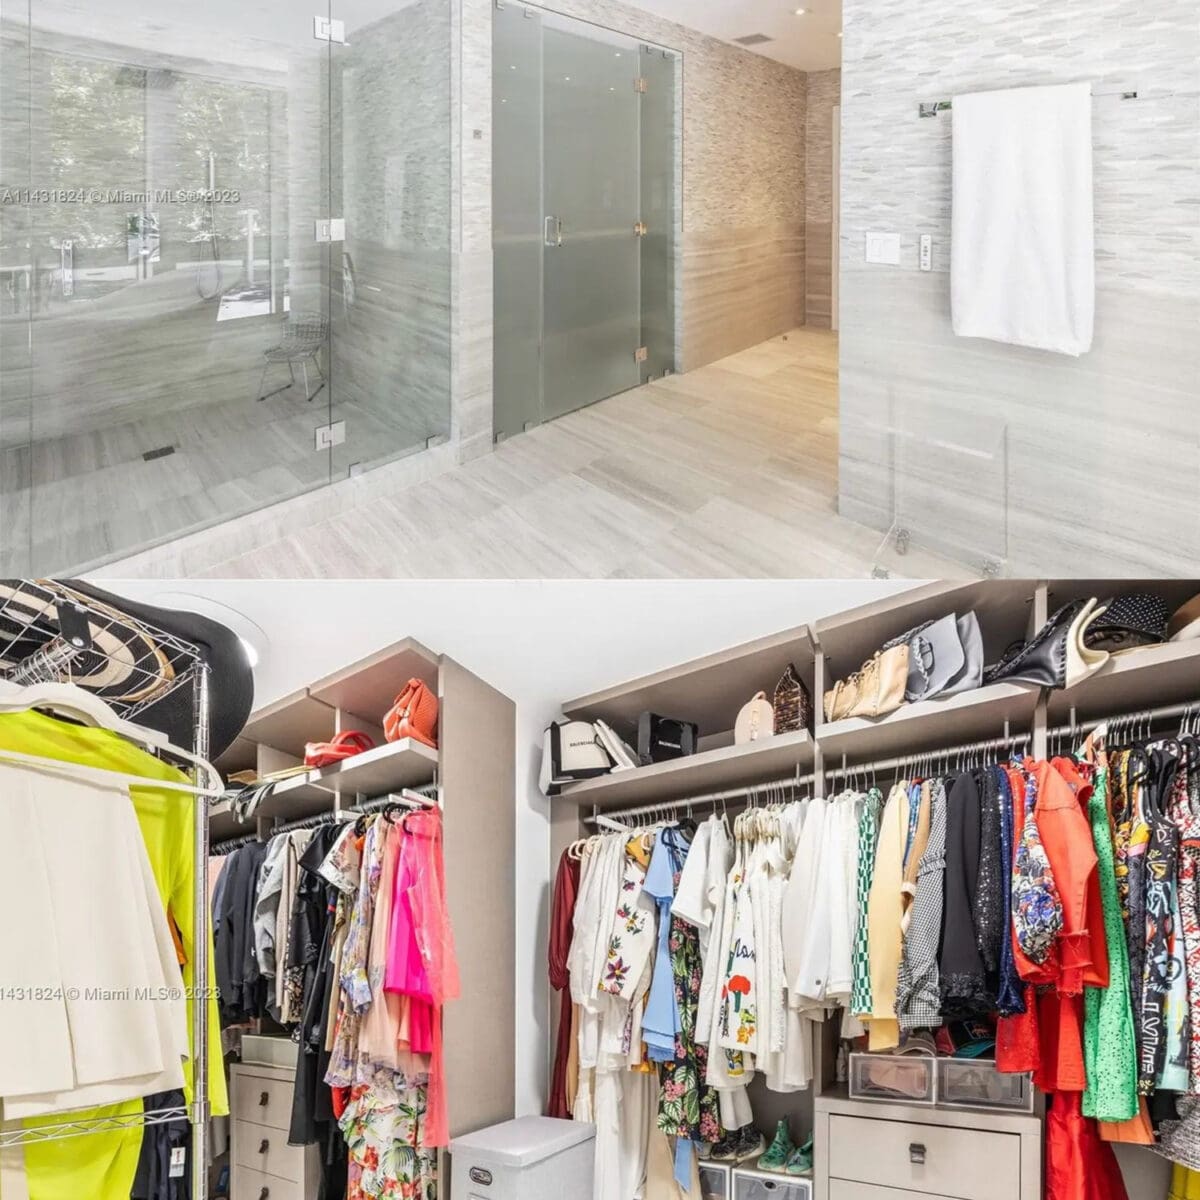 There is also no shortage of walk-in closet space in Lisa Hochstein's new home.